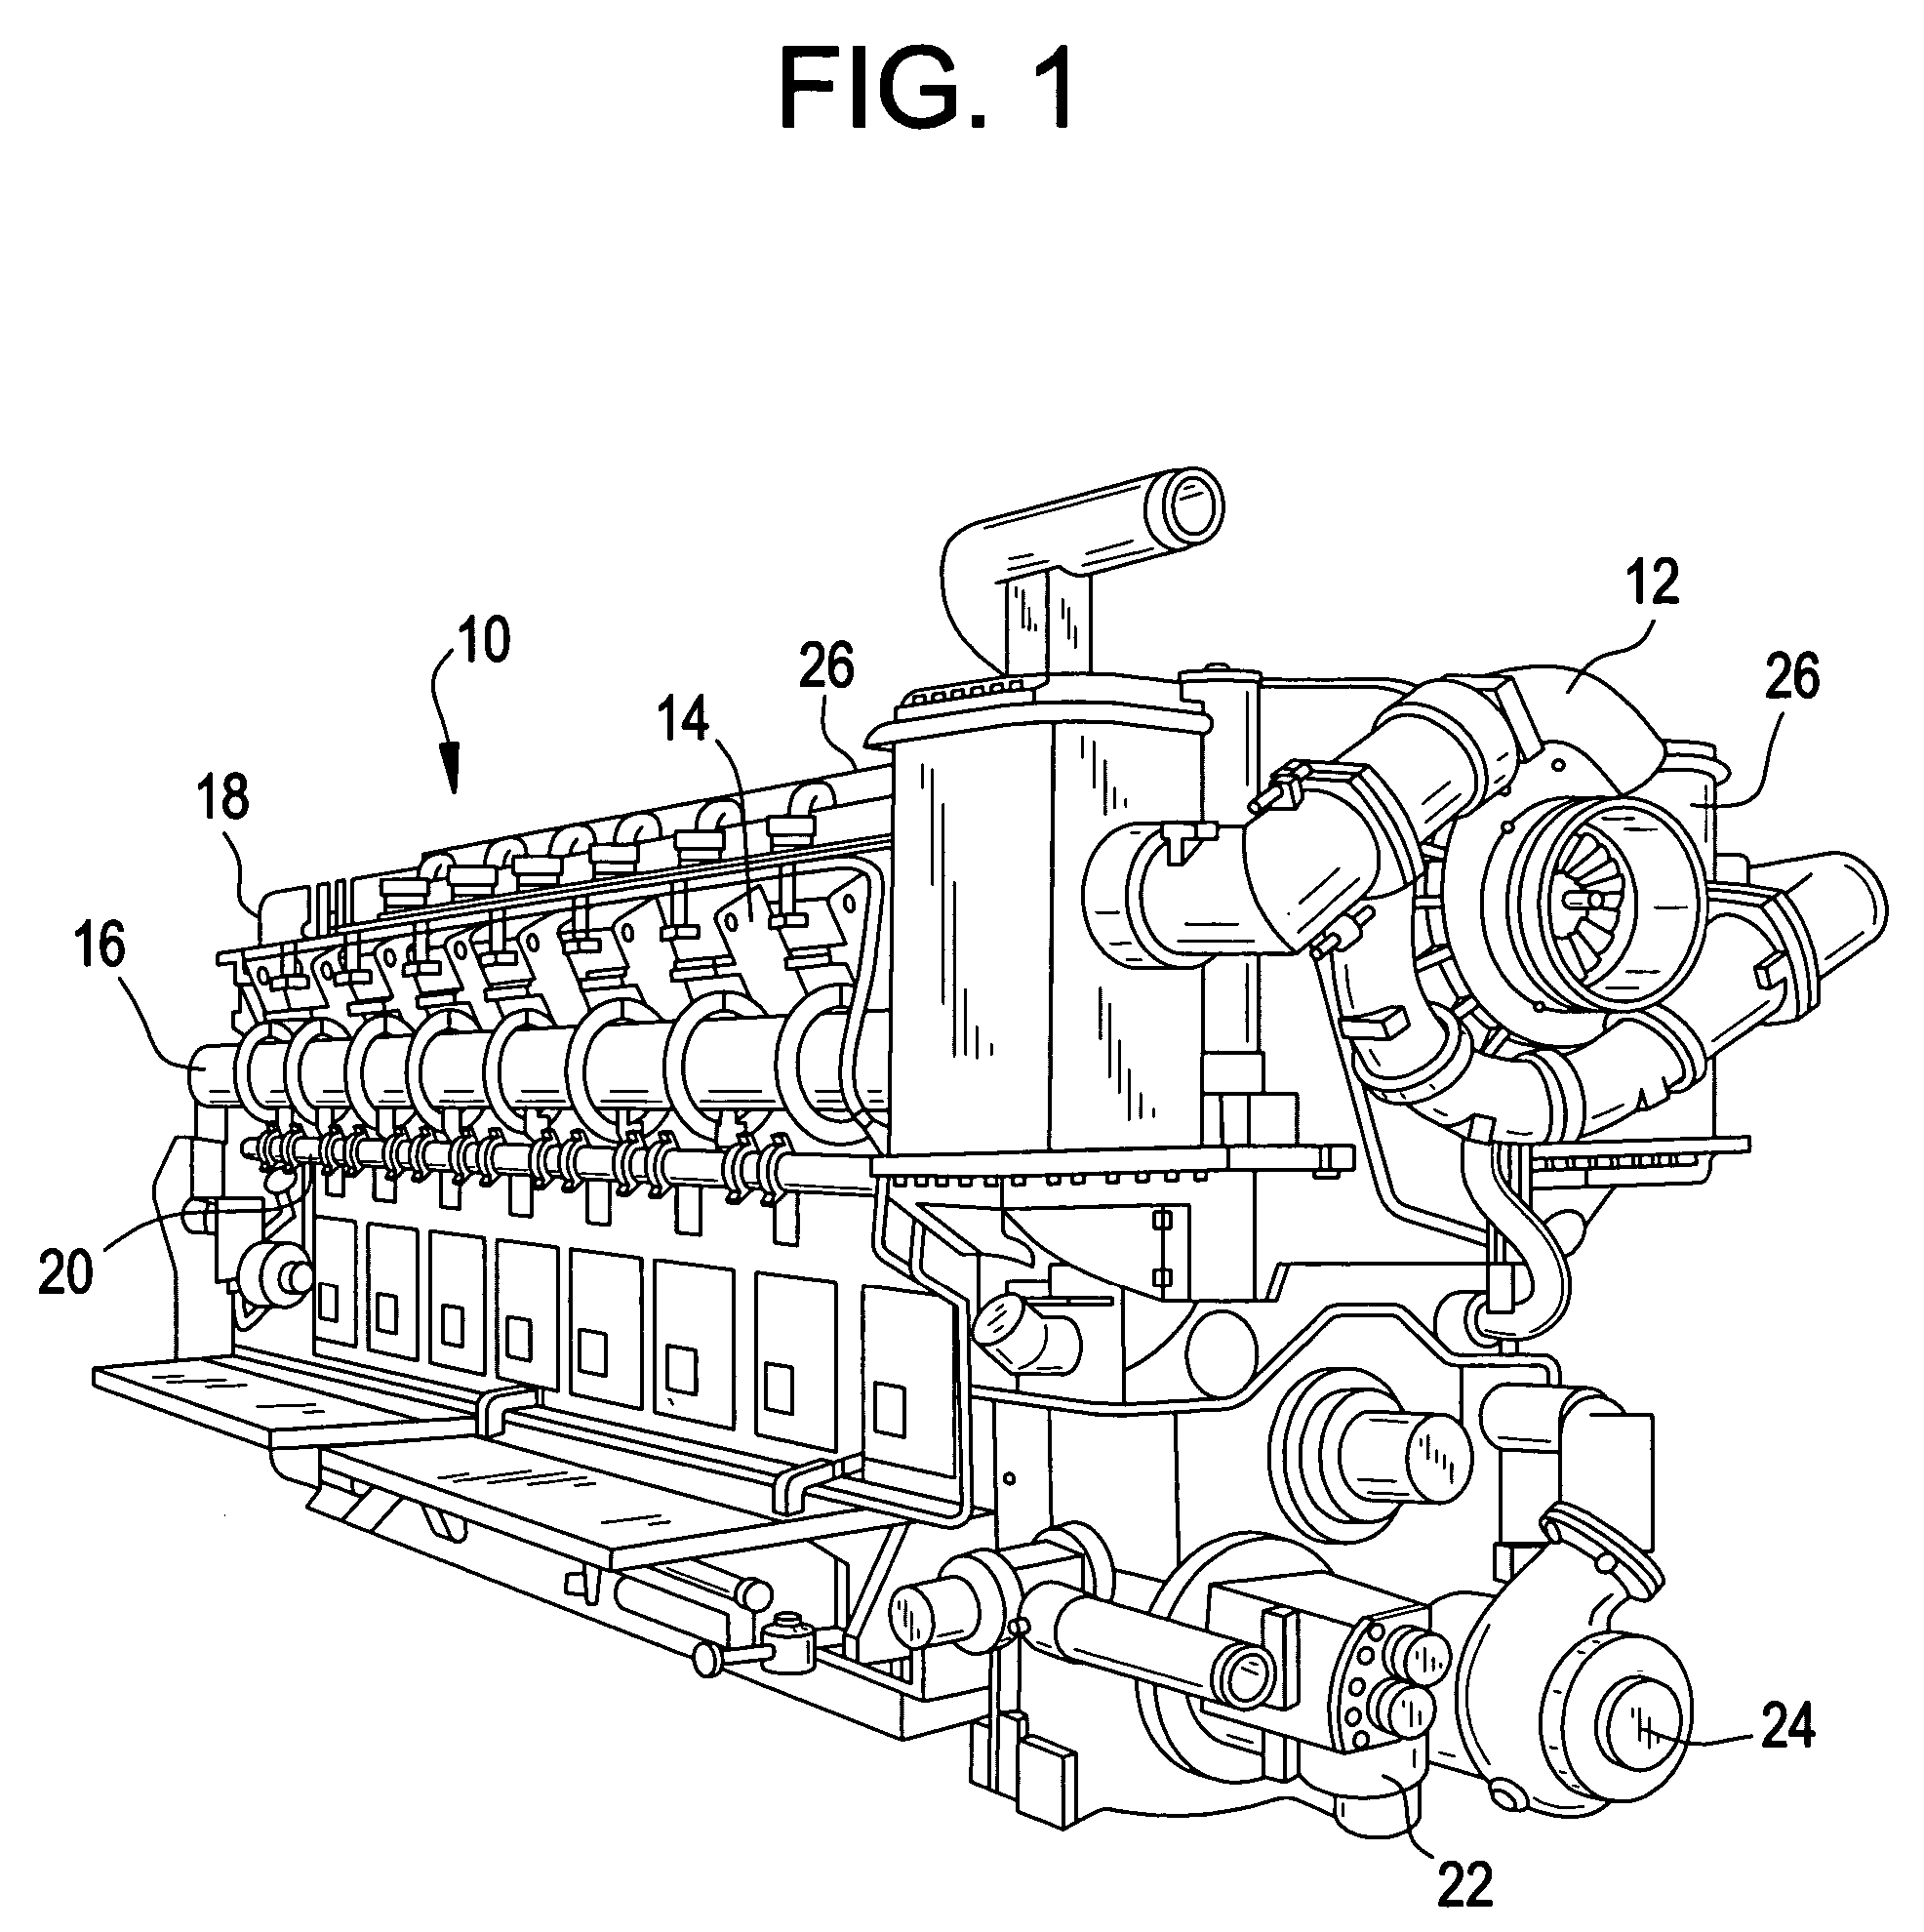 Apparatus and method for suppressing internal combustion ignition engine emissions